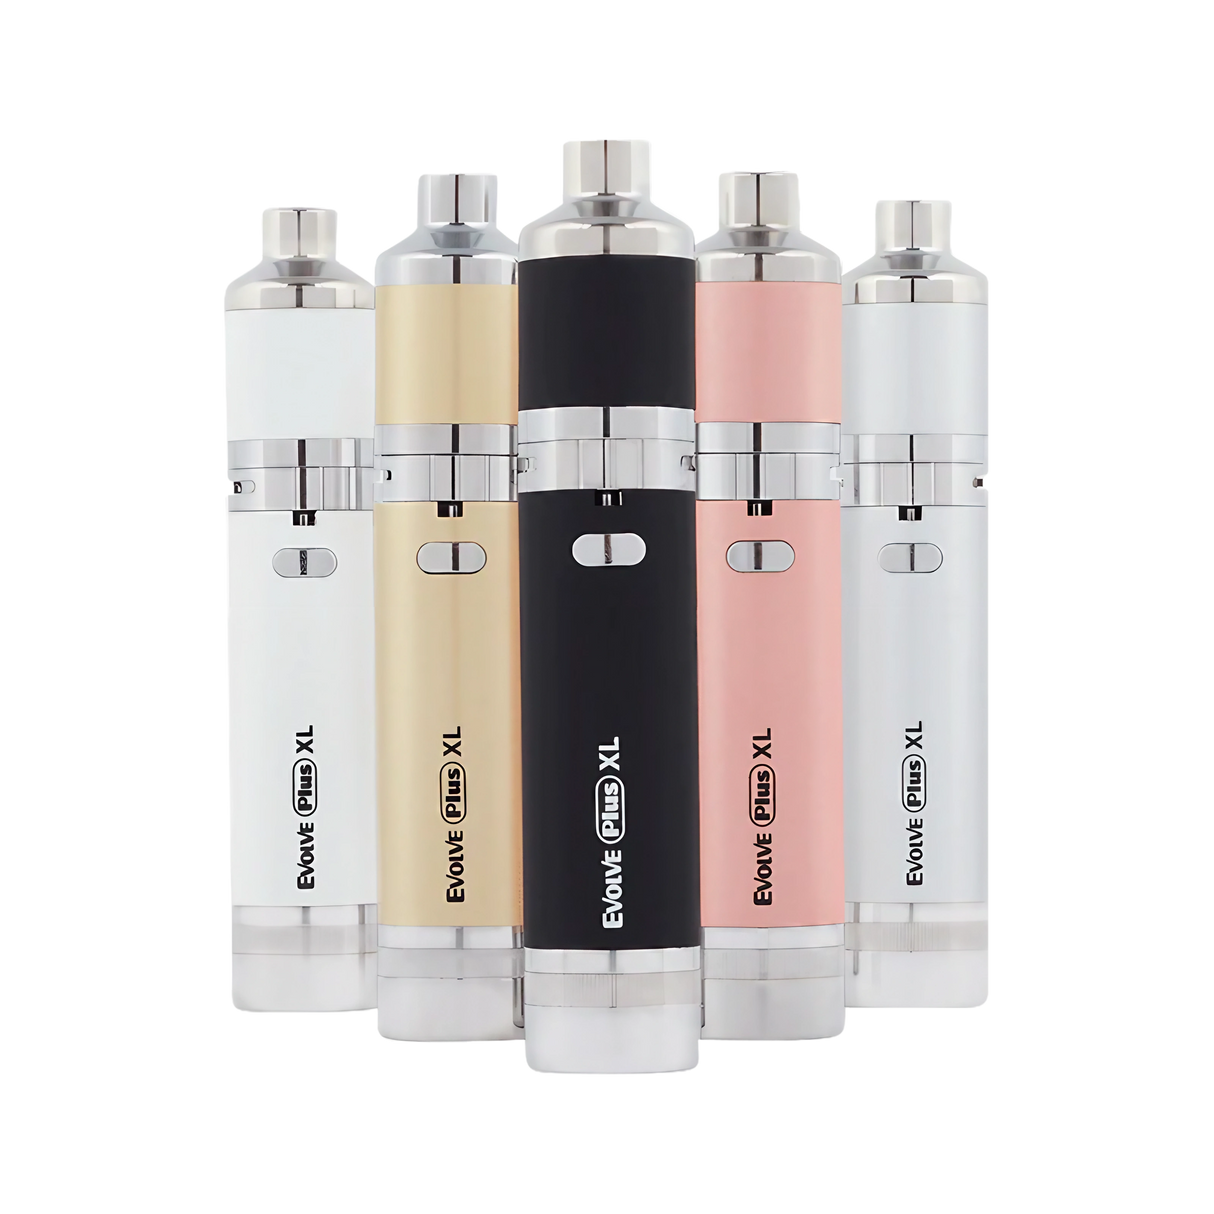 Yocan Evolve Plus XL Vaporizers in assorted colors, front view, portable design for concentrates